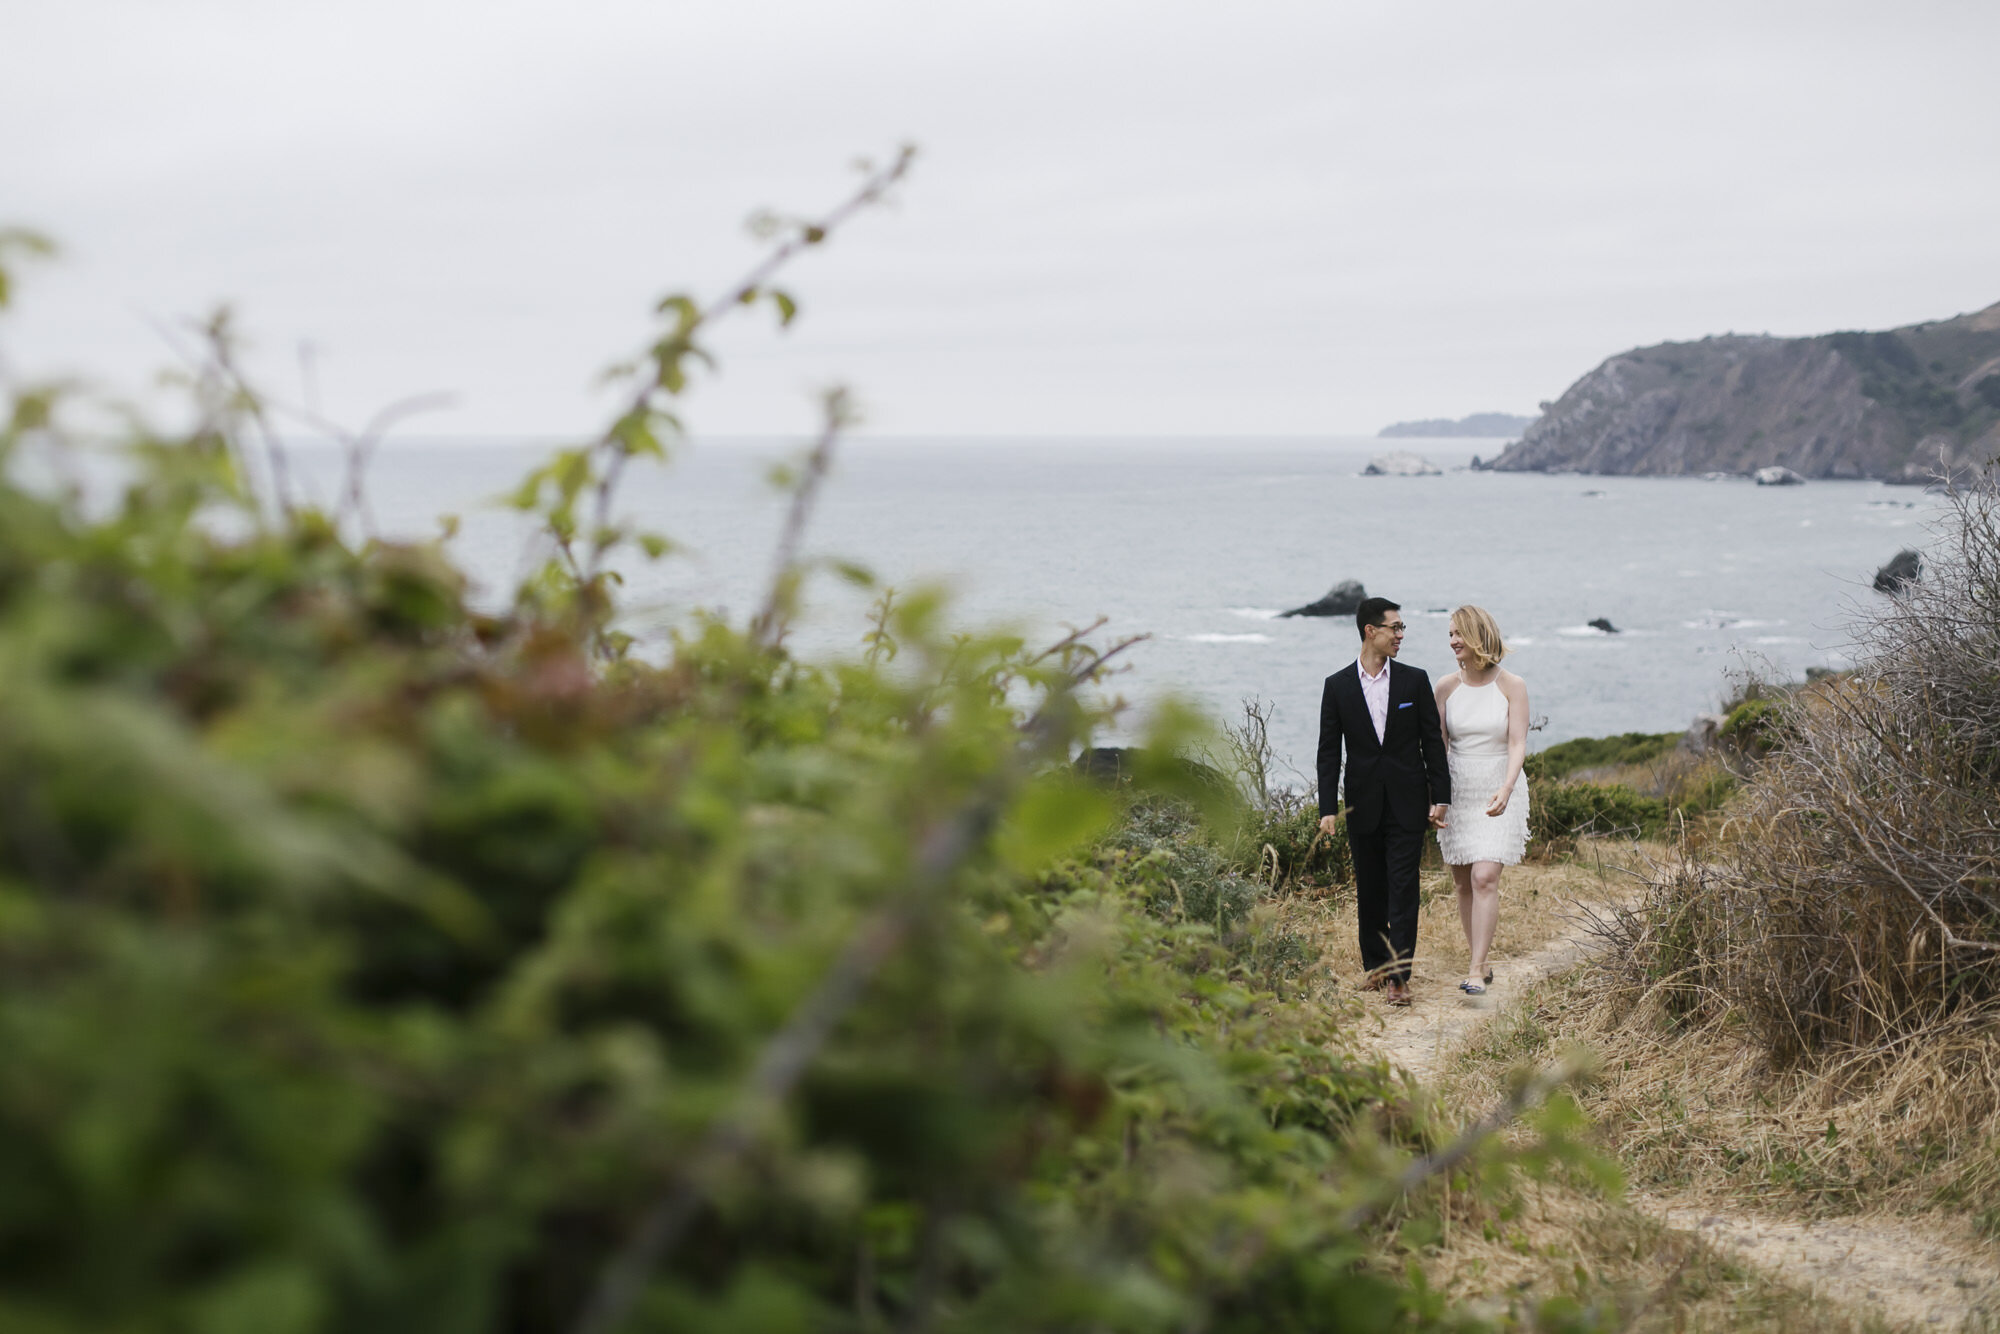 Wedding couple walk holding hands along hiking trail by the ocean